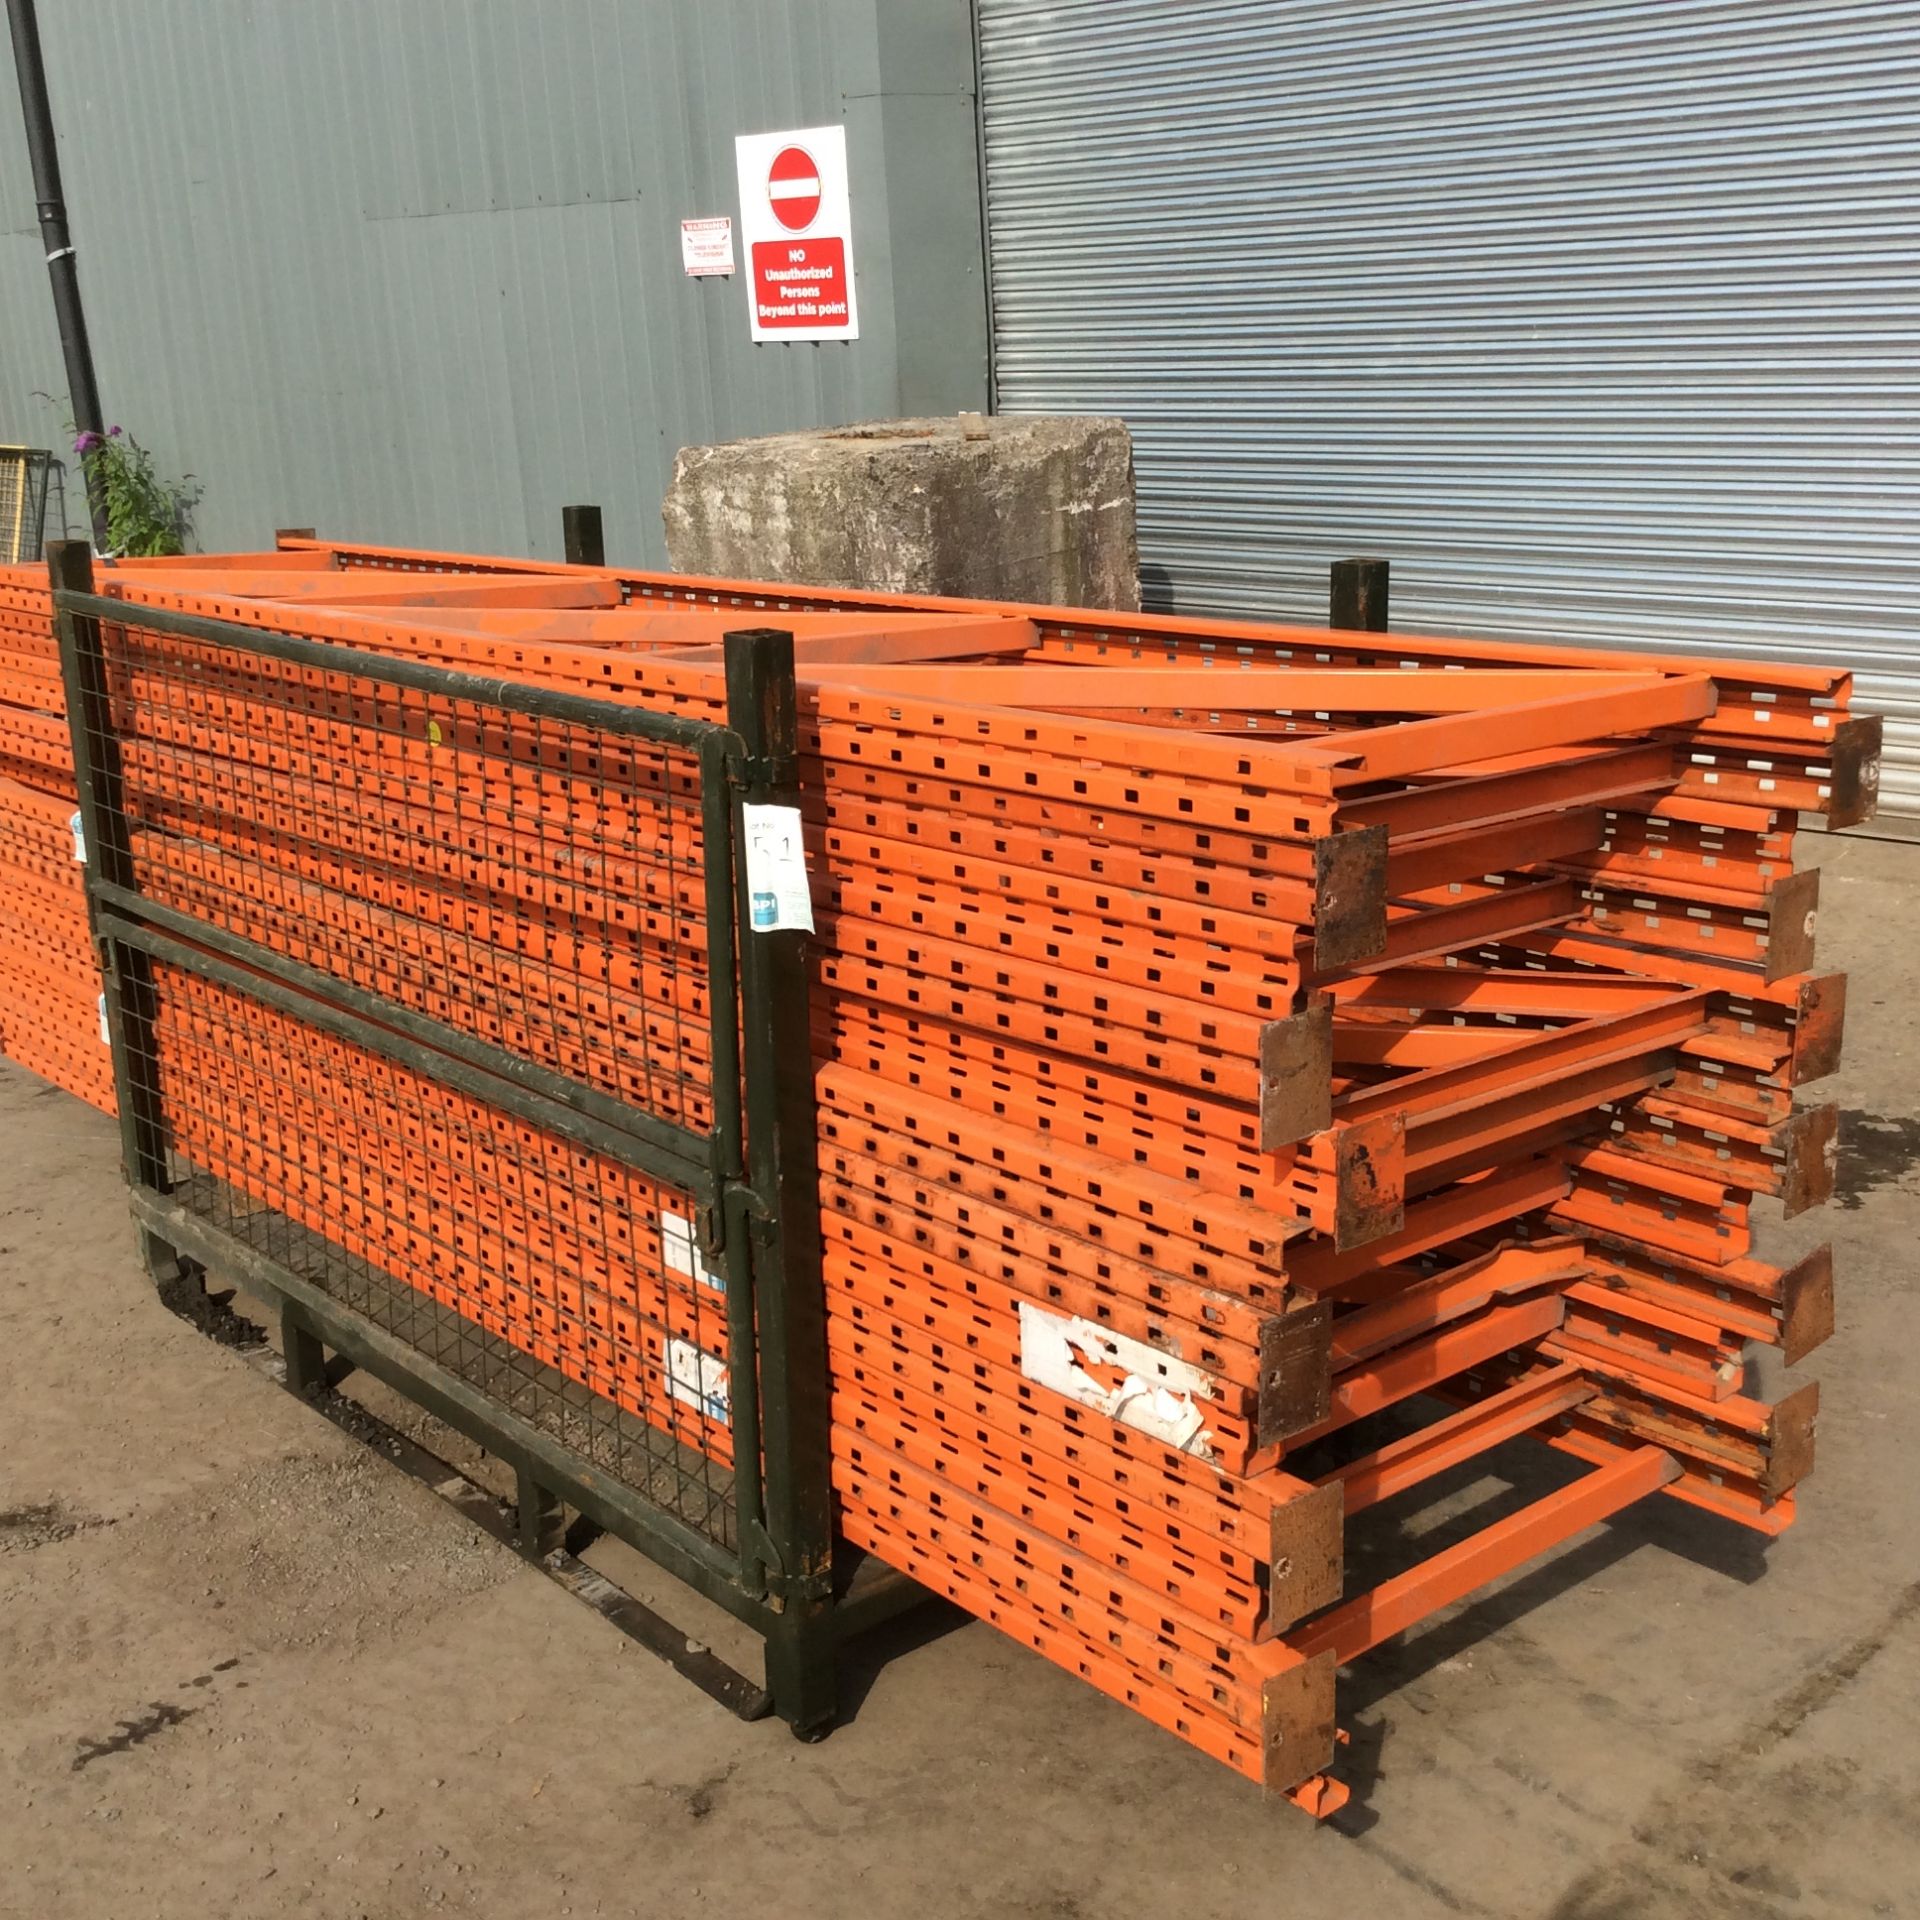 Pallet Racking Included is x12 Uprights - 440cm Height And x86 Beams - 266cm Inside Width. - Image 5 of 7